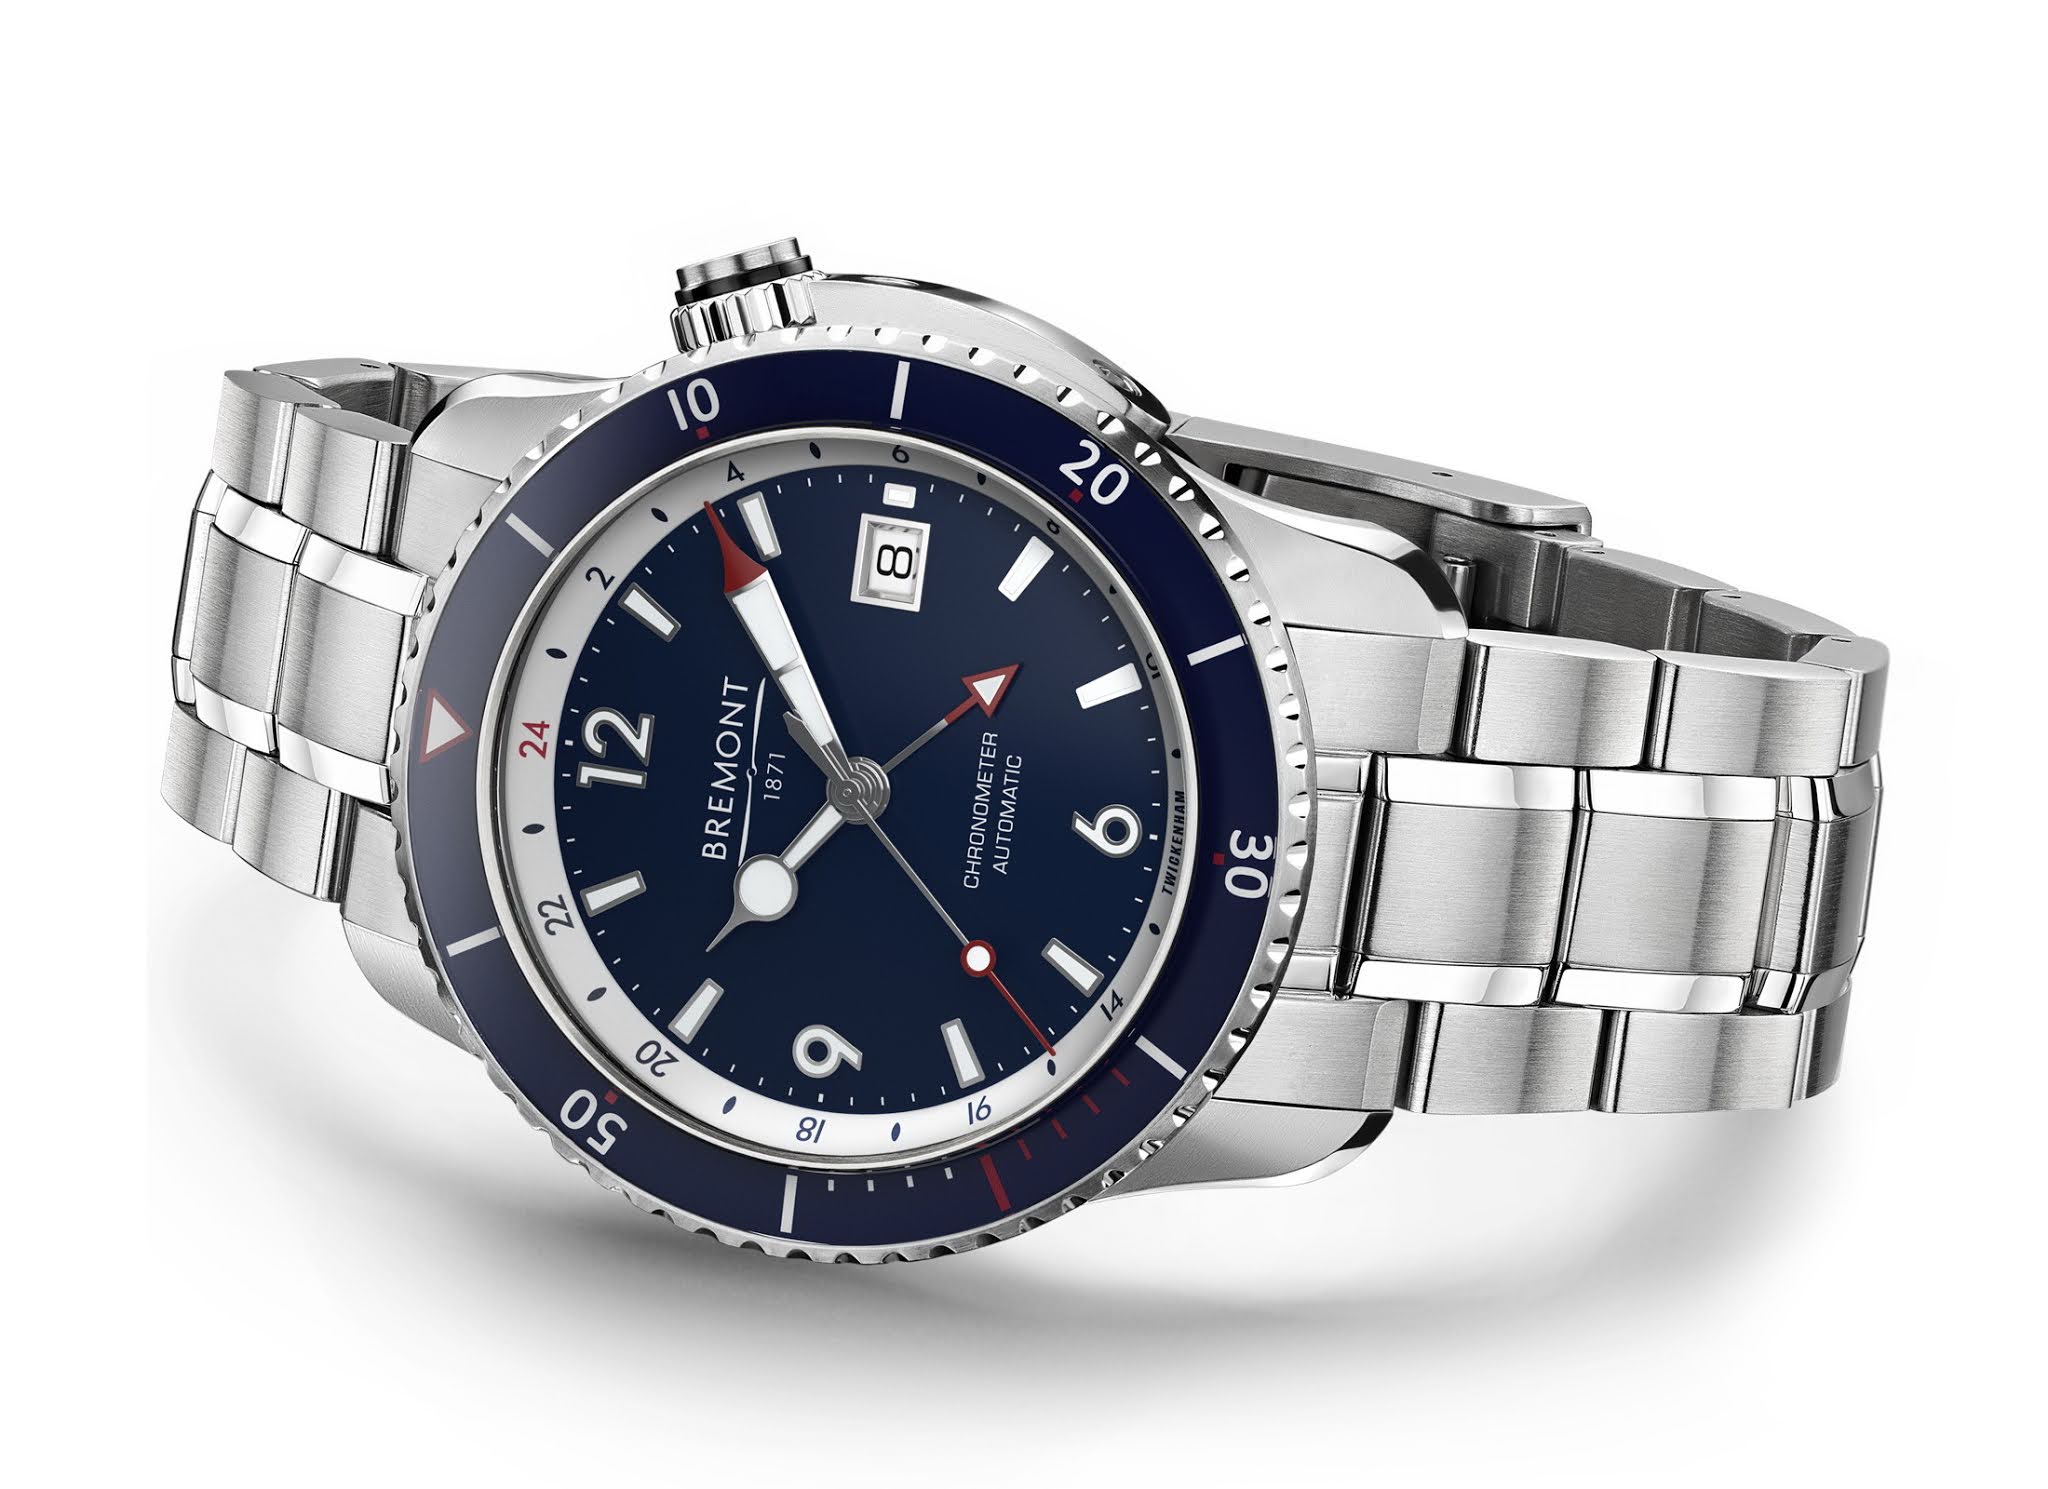 OceanicTime BREMONT S500 RFU Limited Edition